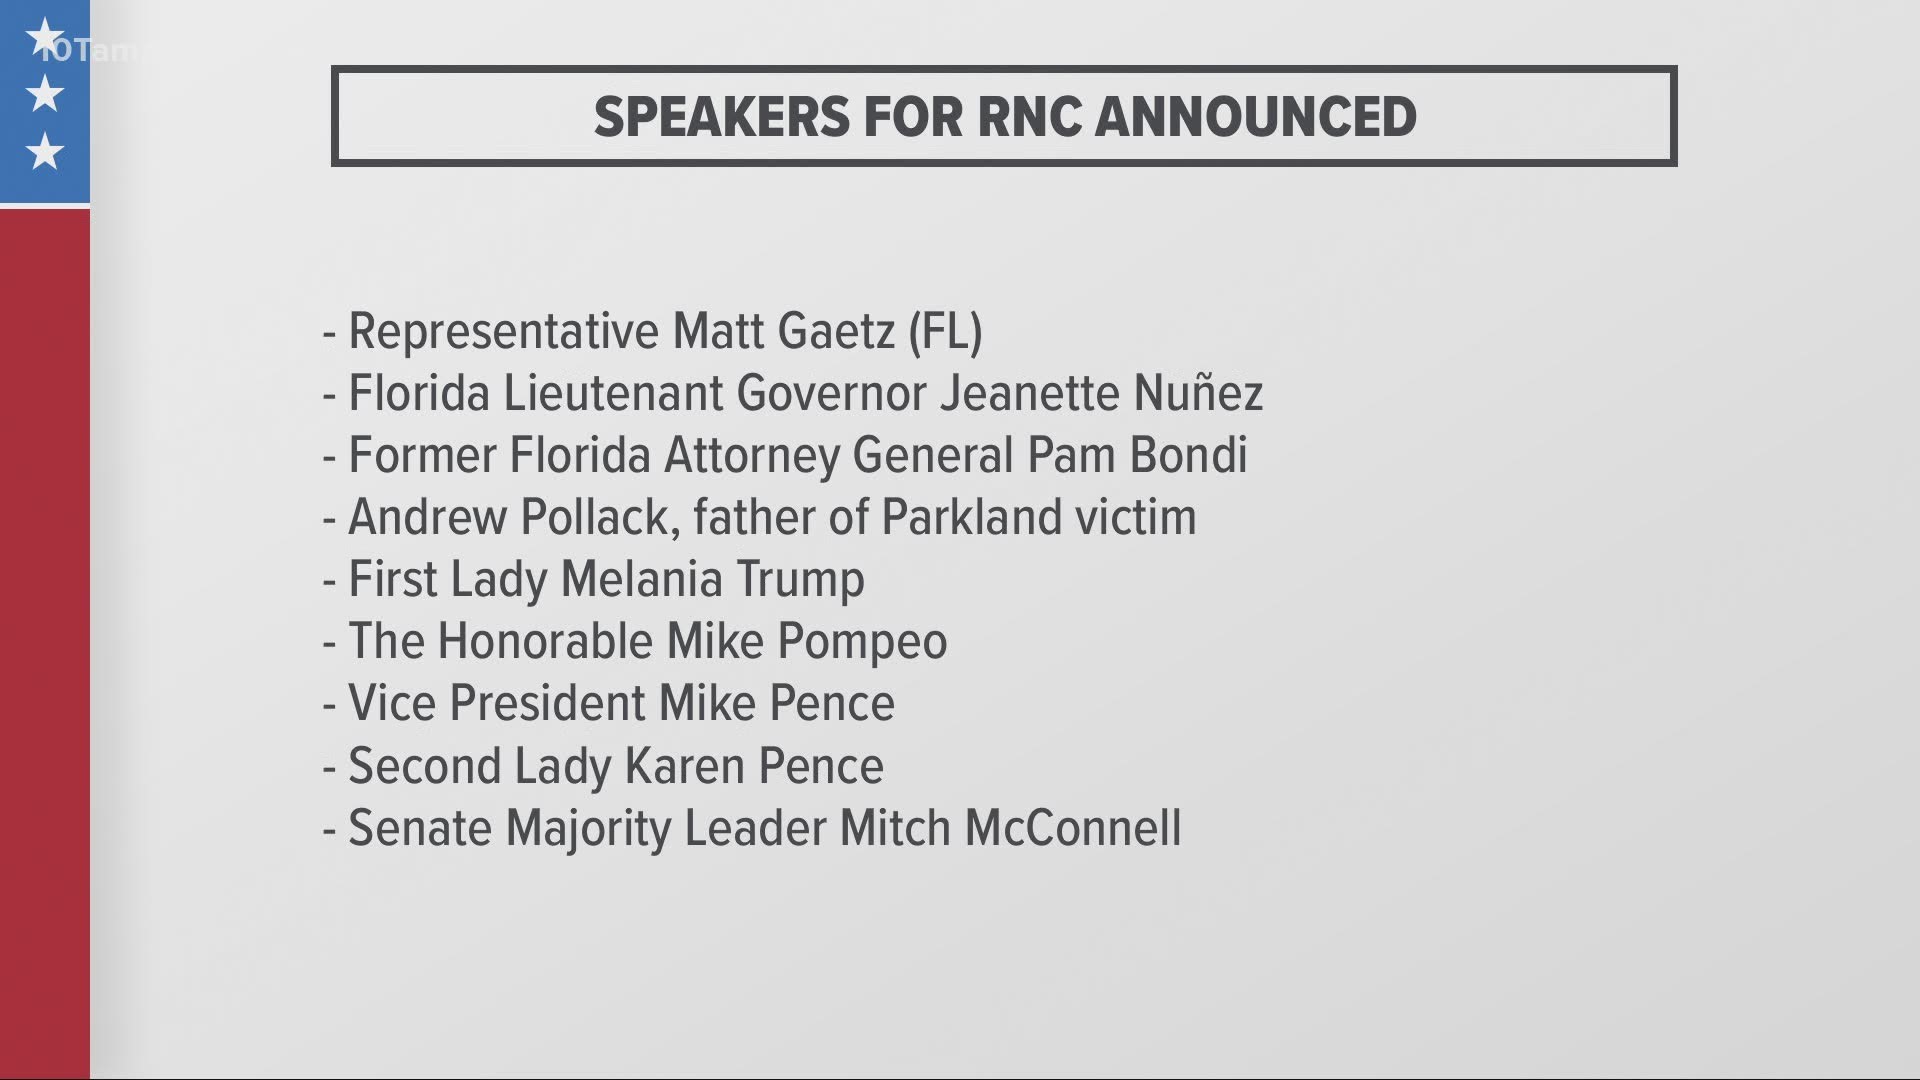 The theme of the RNC is 'Honoring the Great American Story' and will feature speakers from everyday life as well as cable news and the White House.